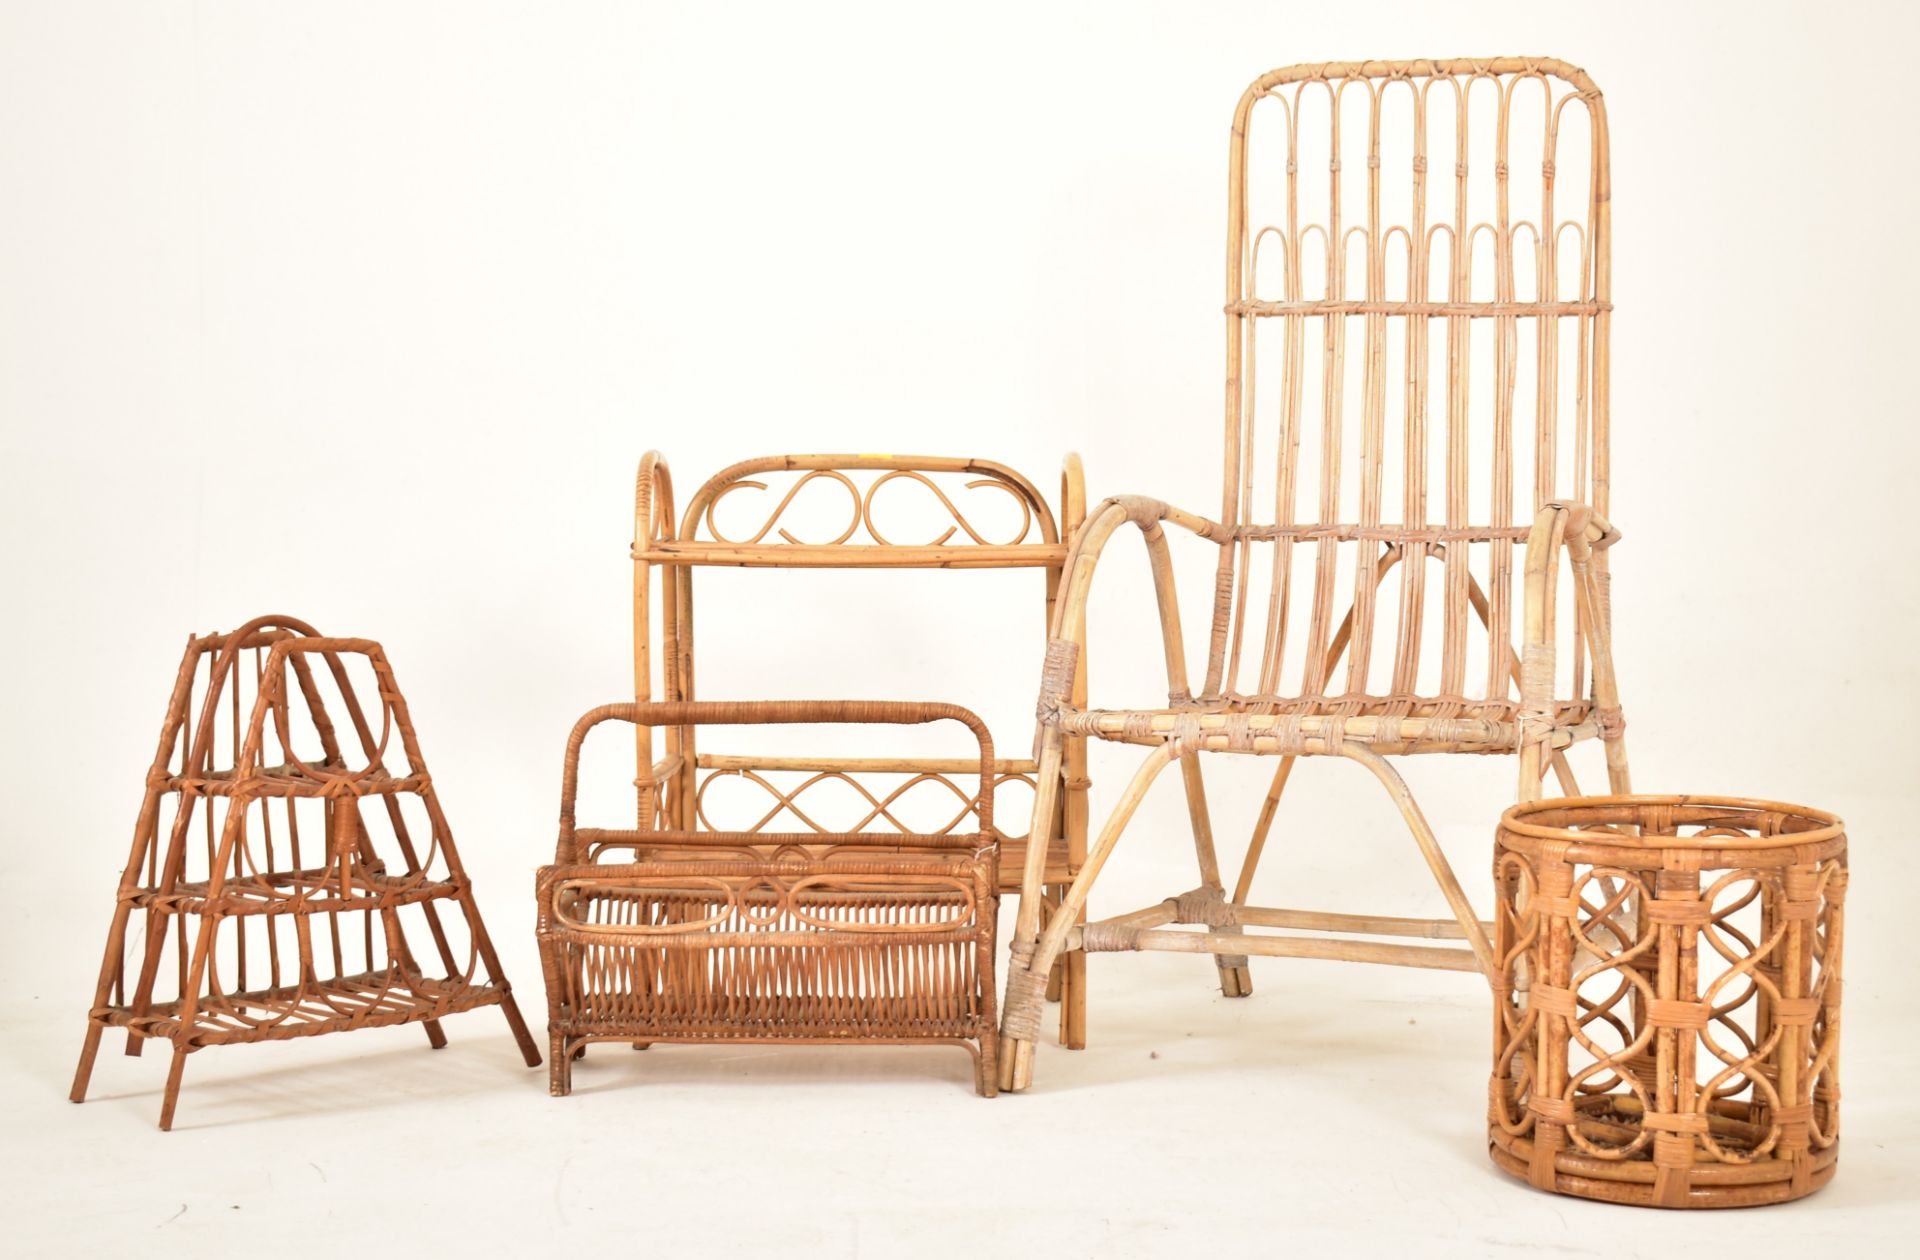 SELECTION OF 20TH CENTURY BAMBOO & WICKER HOME FURNISHINGS